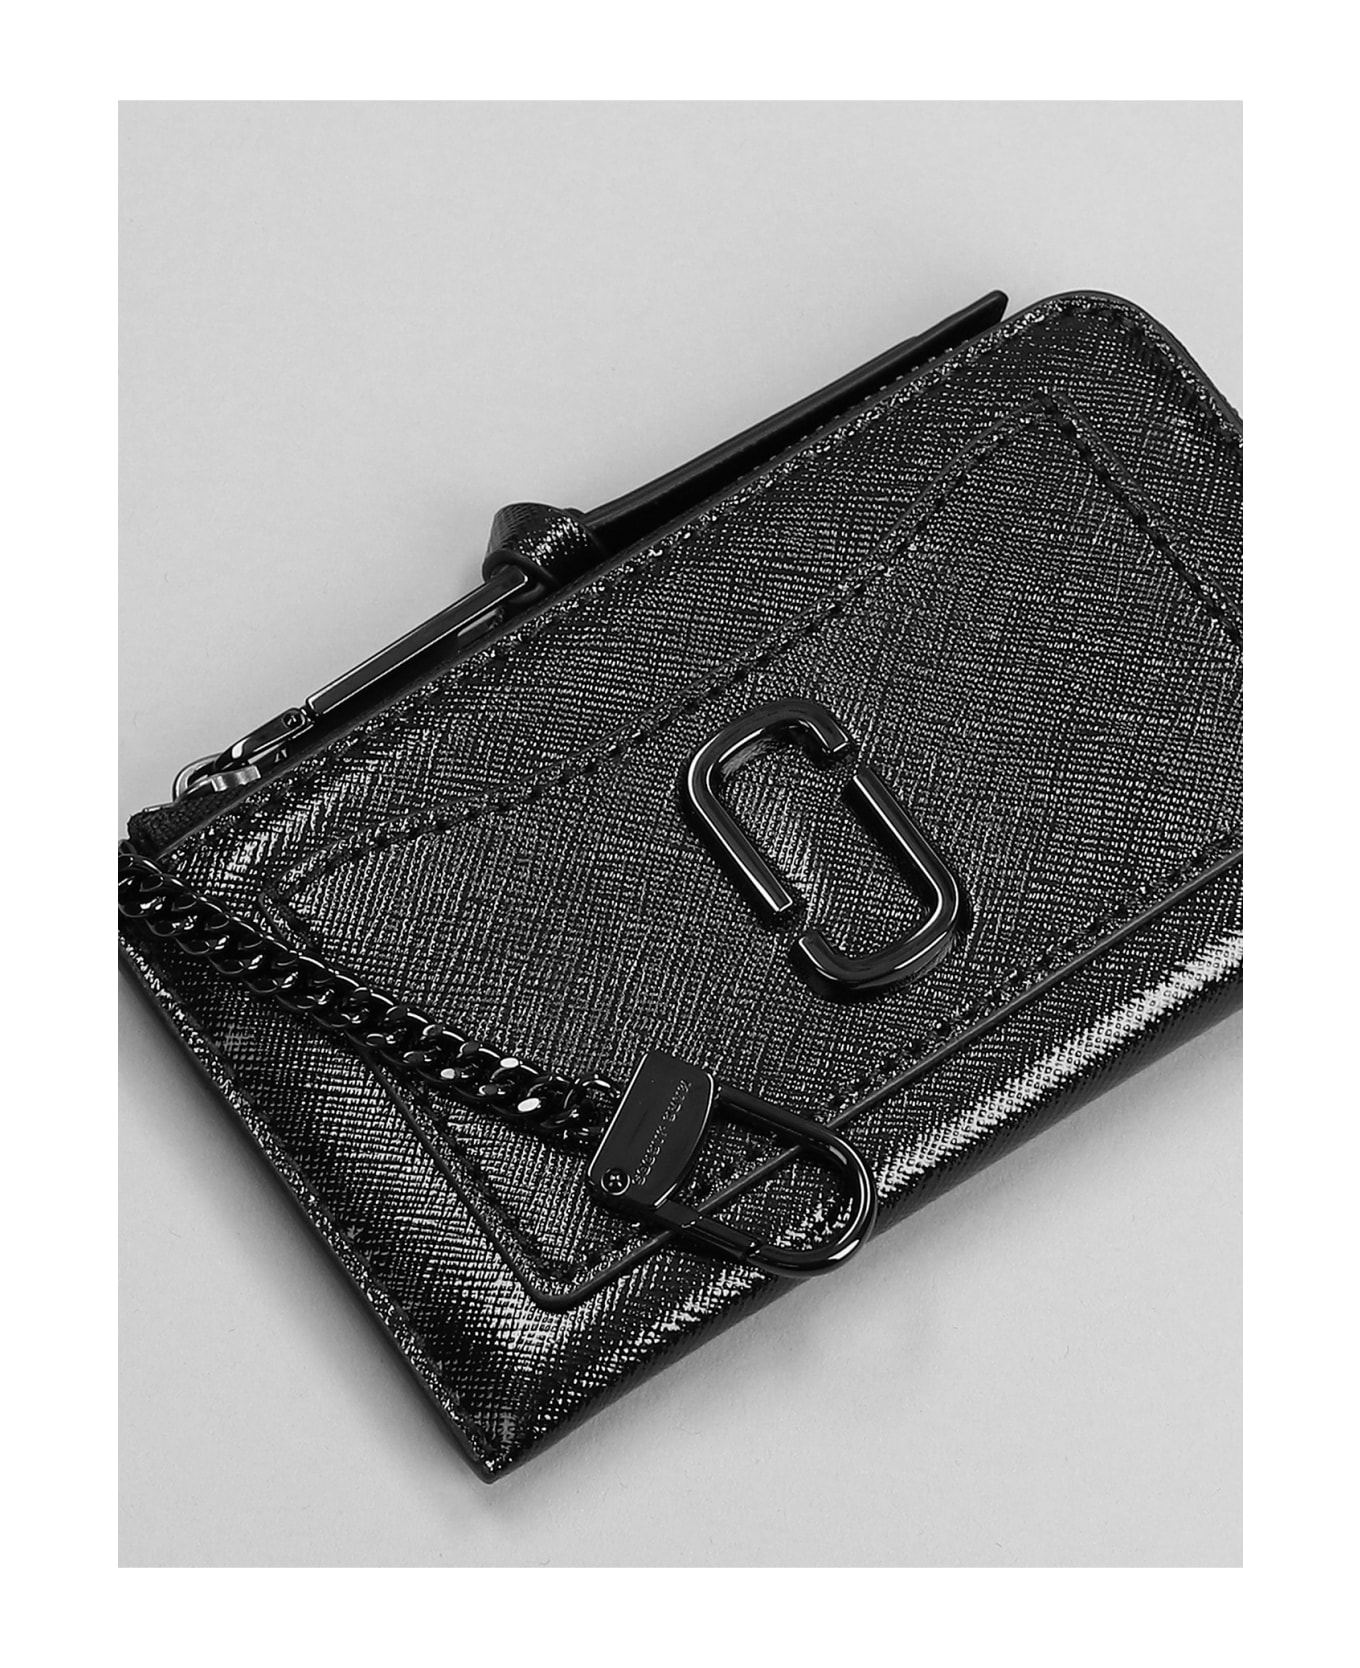 Marc Jacobs The Top Zip Multi Wallet In Black Leather - NERO